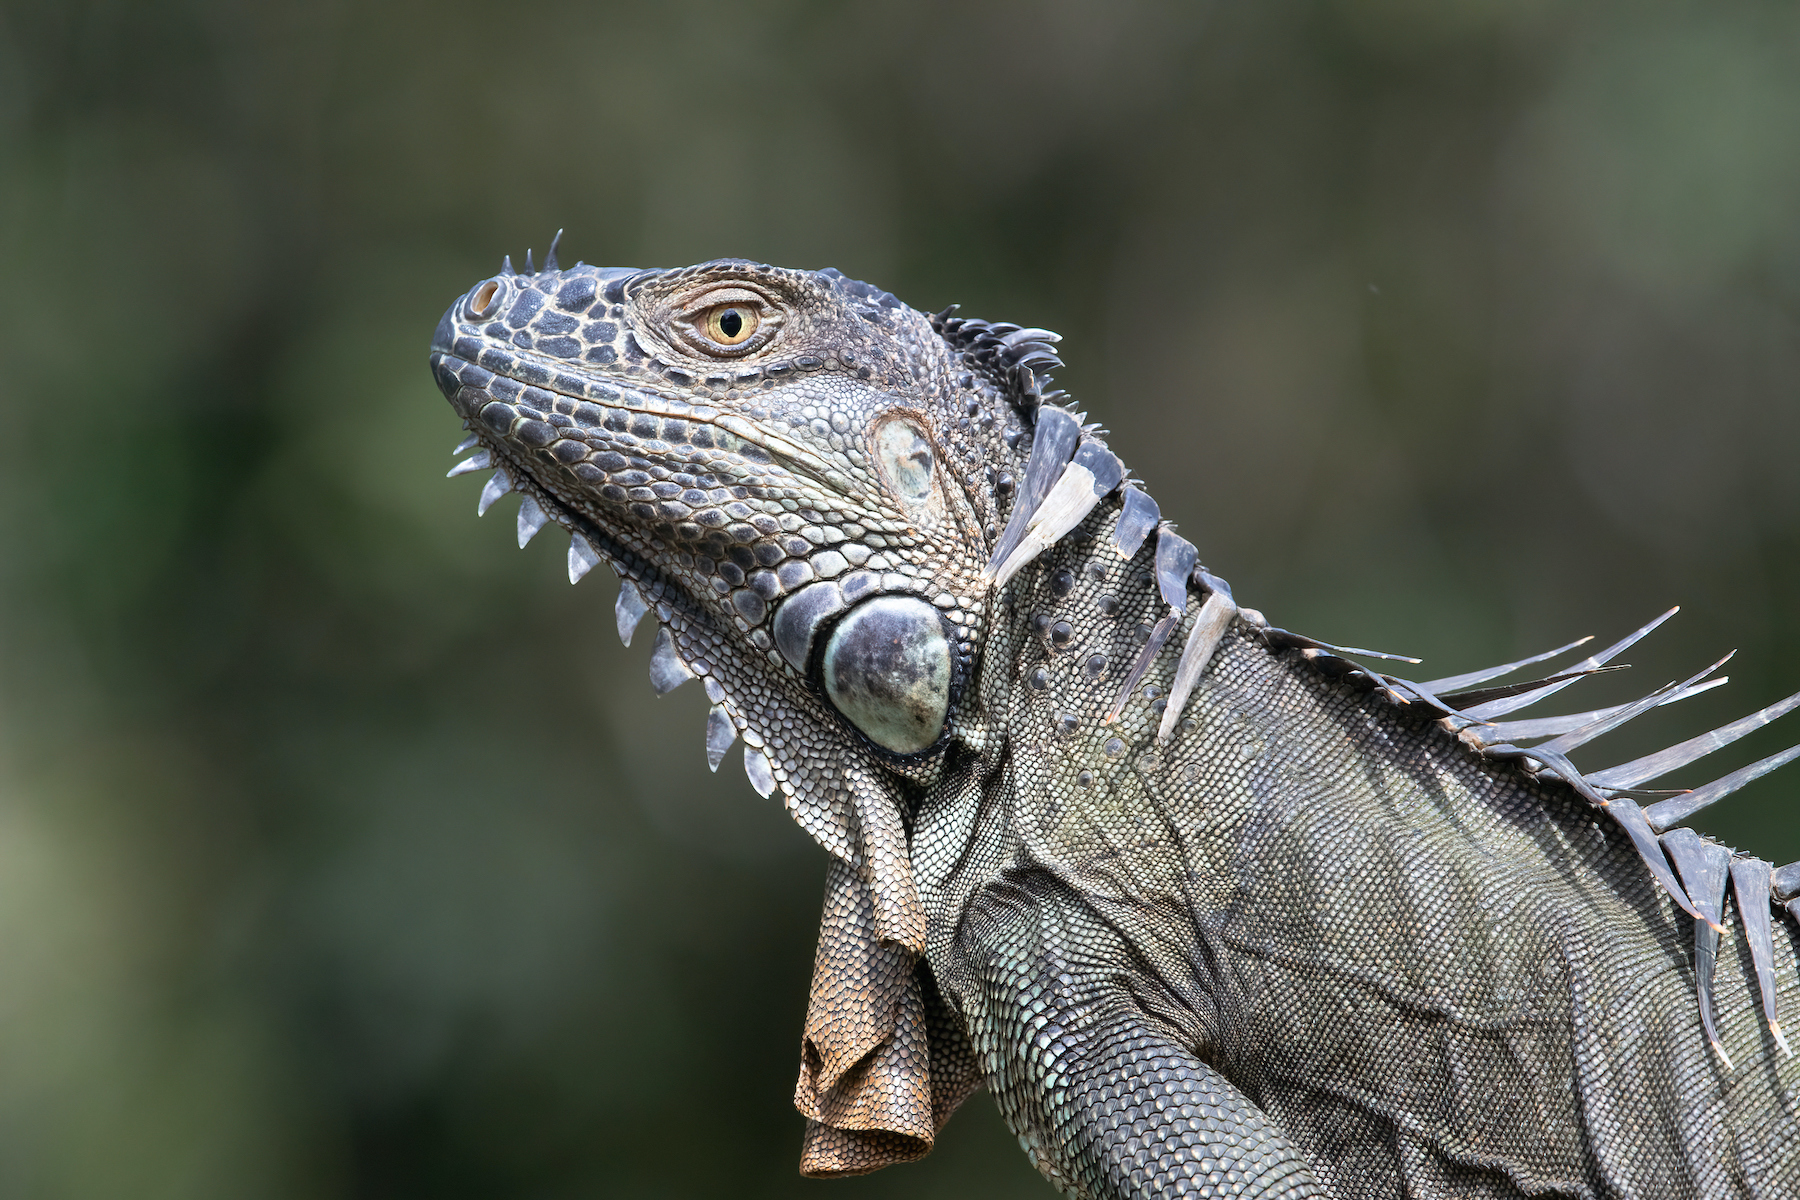 Green Iguanas are not always green. In fact they can go through several colour phases in their lives - all of them quite becoming